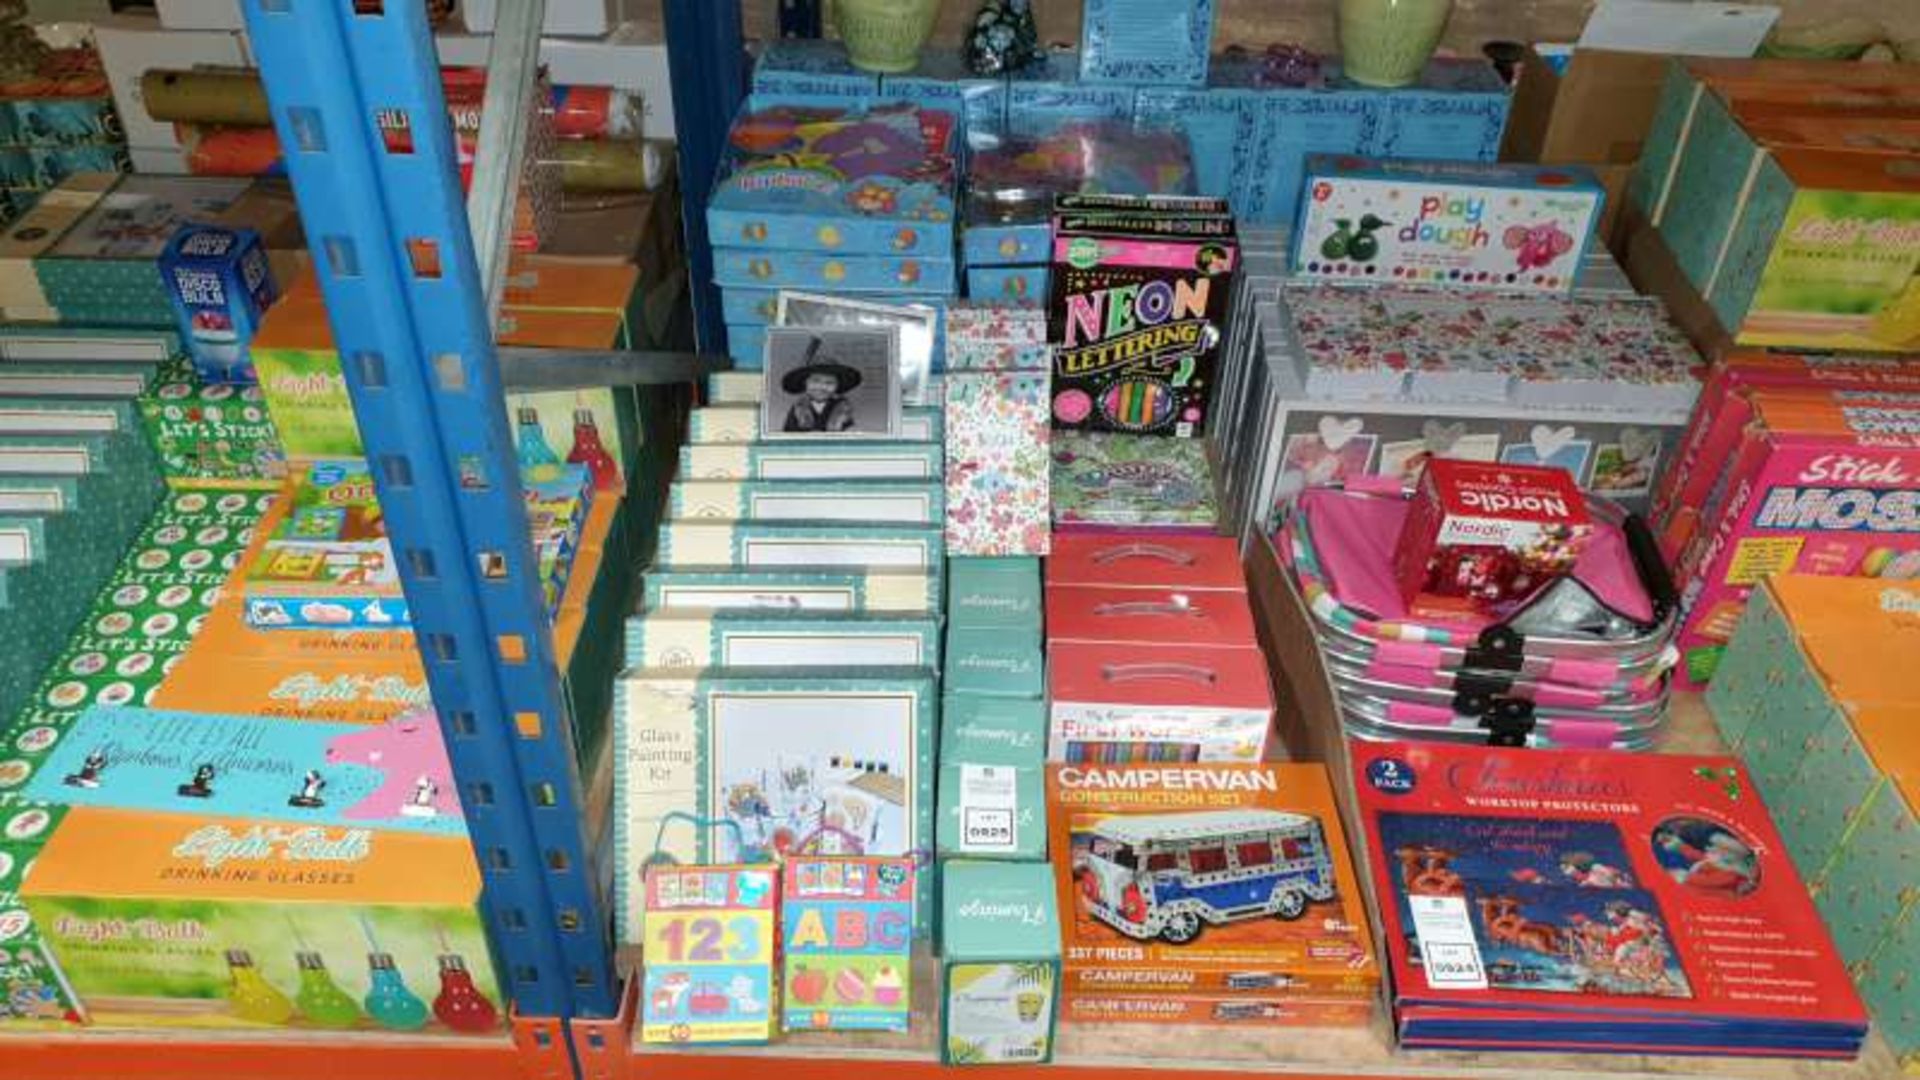 MIXED LOT CONTAINING GLASS PAINTING KITS, CAMPERVAN CONSTRUCTION SETS, MY LEARNING LIBRARY FIRST